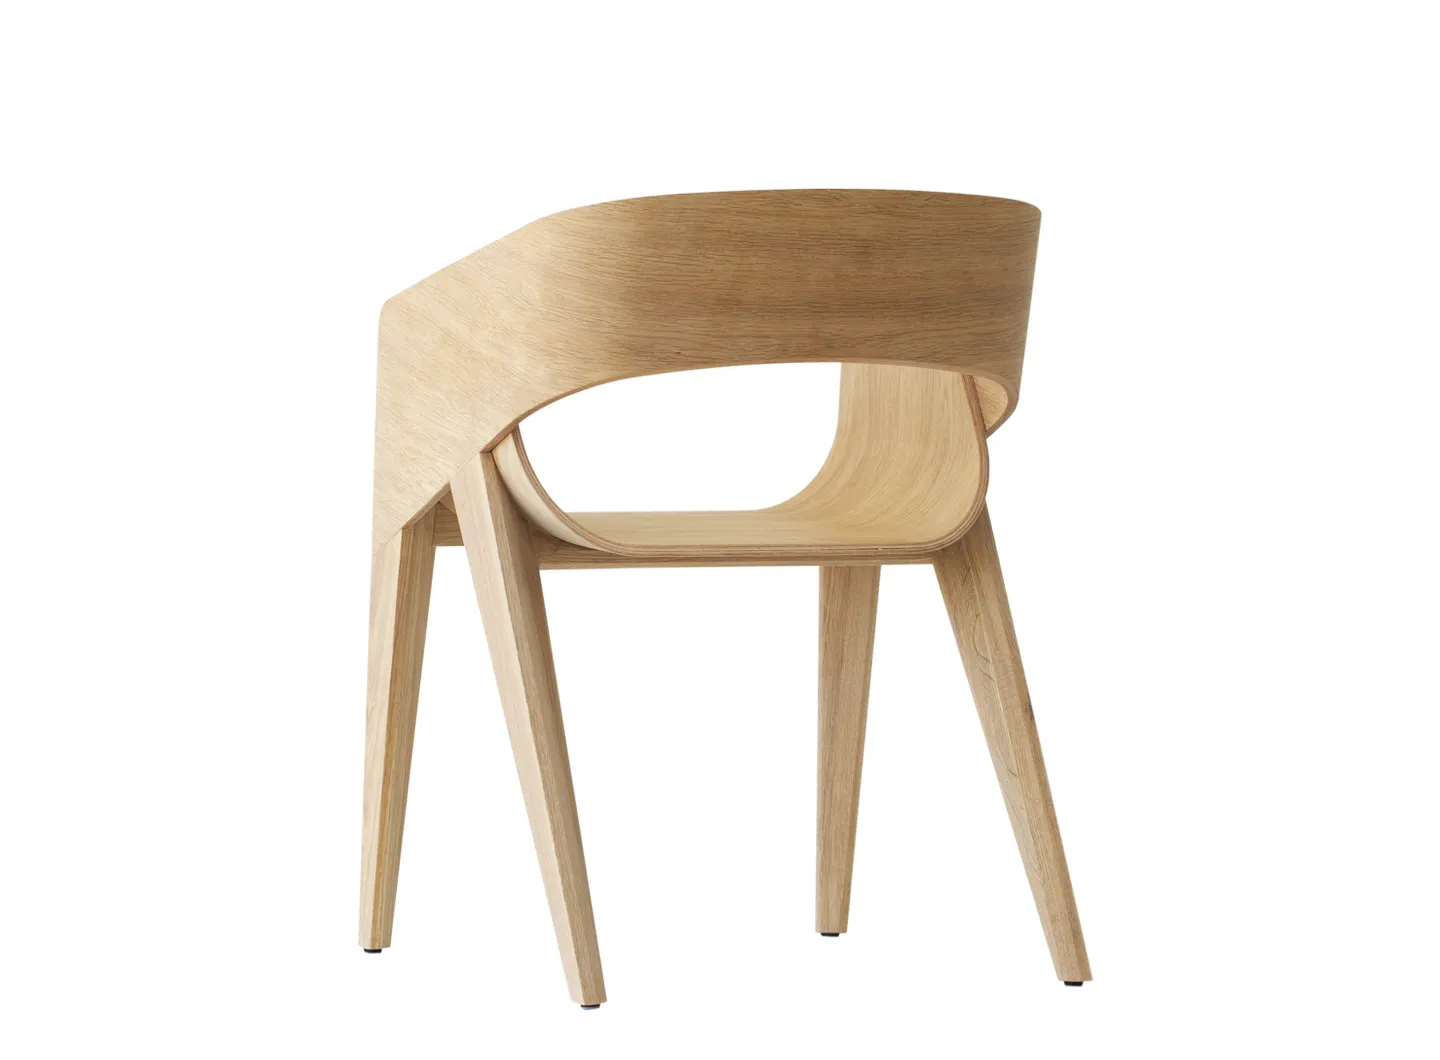  wooden chair with arms